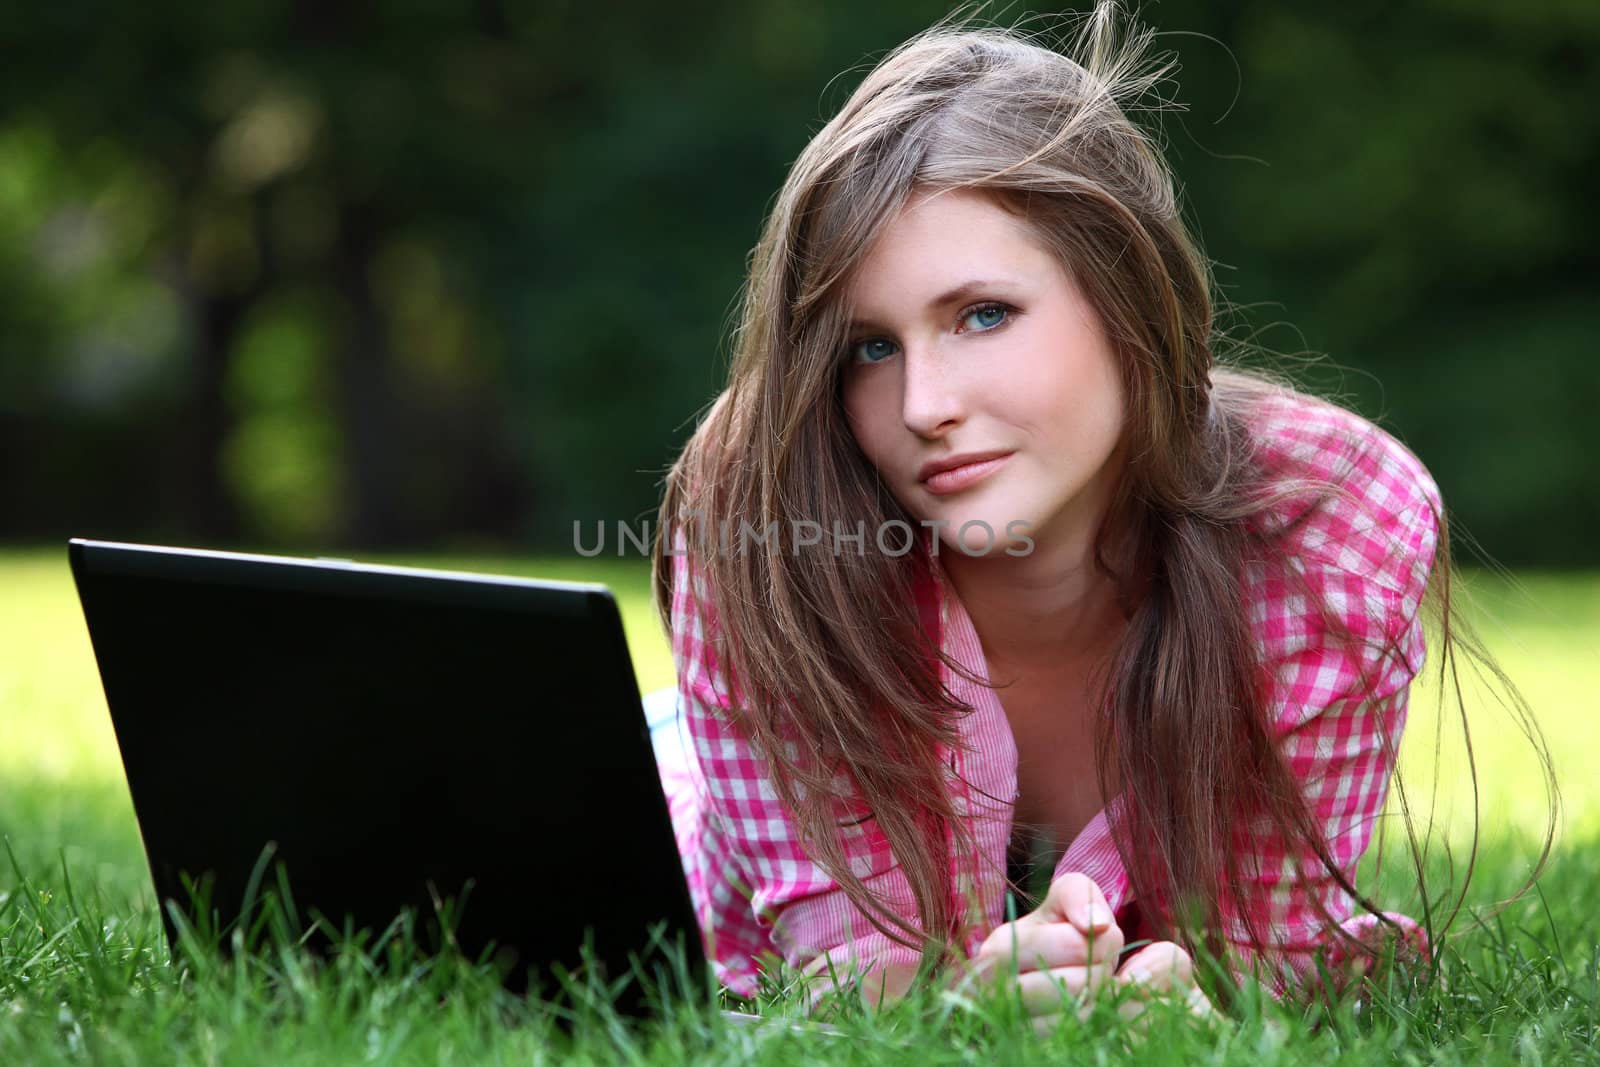 Young and beautiful woman with laptop in park